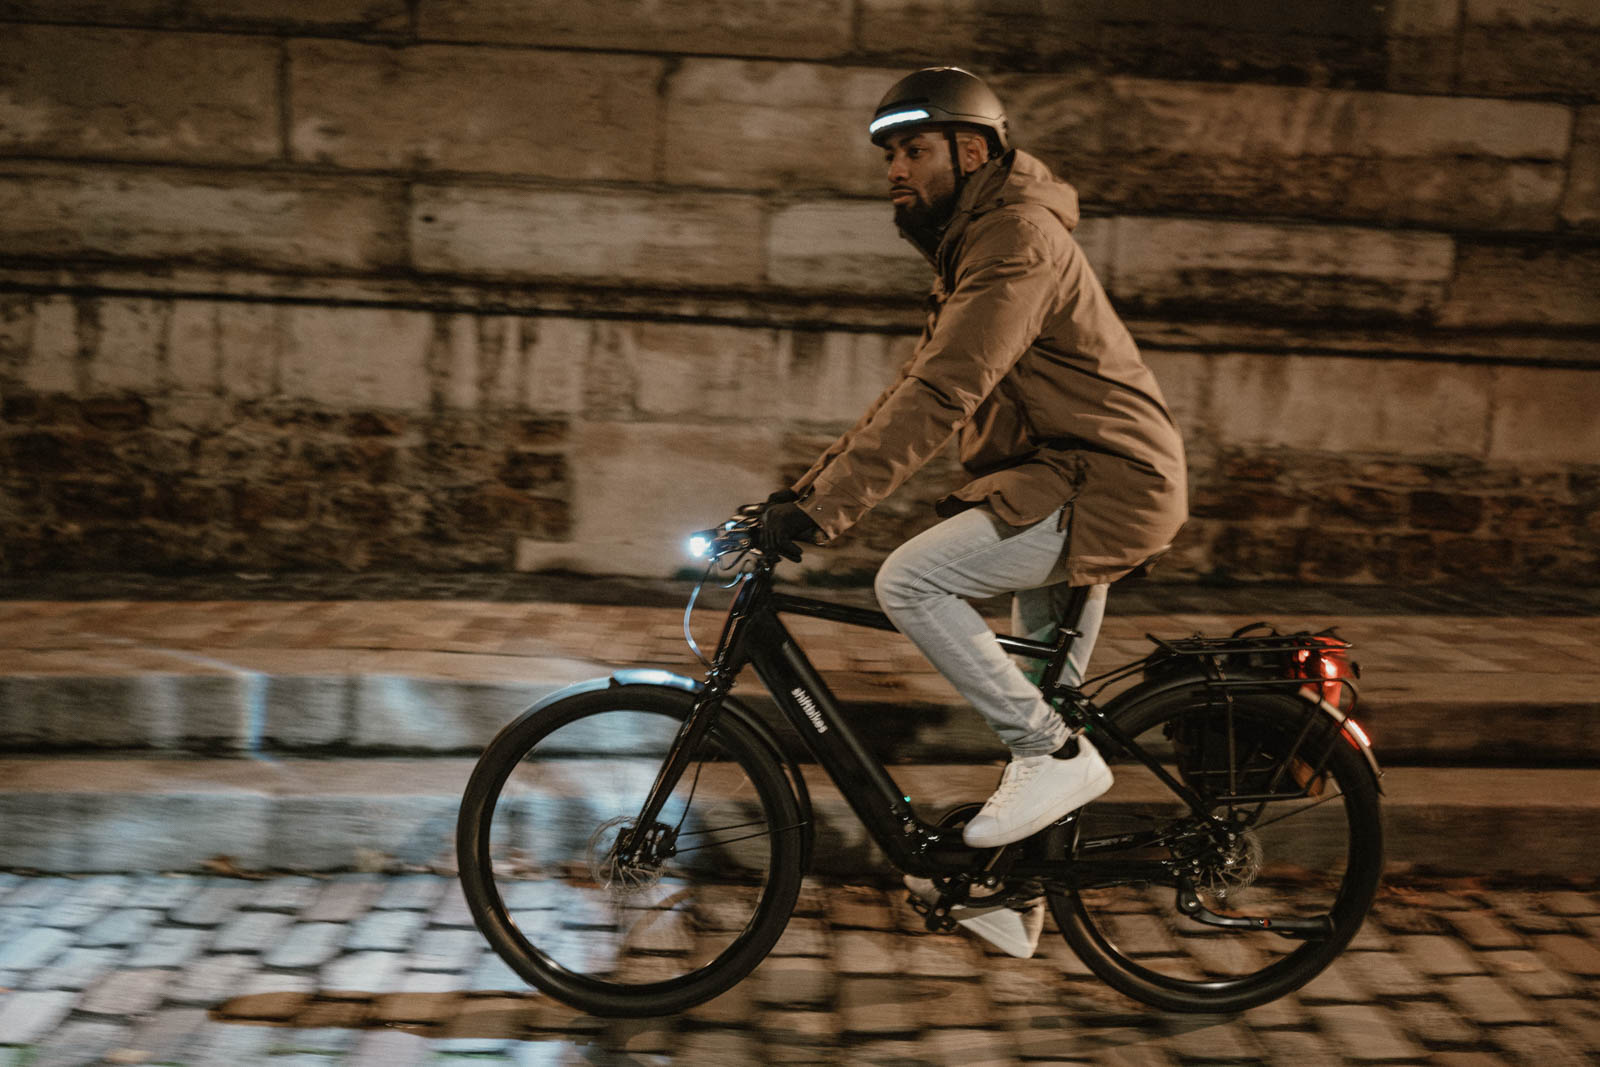 ‘Remarkable’ Commuter Helmet Has Turn Signals that Work by Nodding Your Head